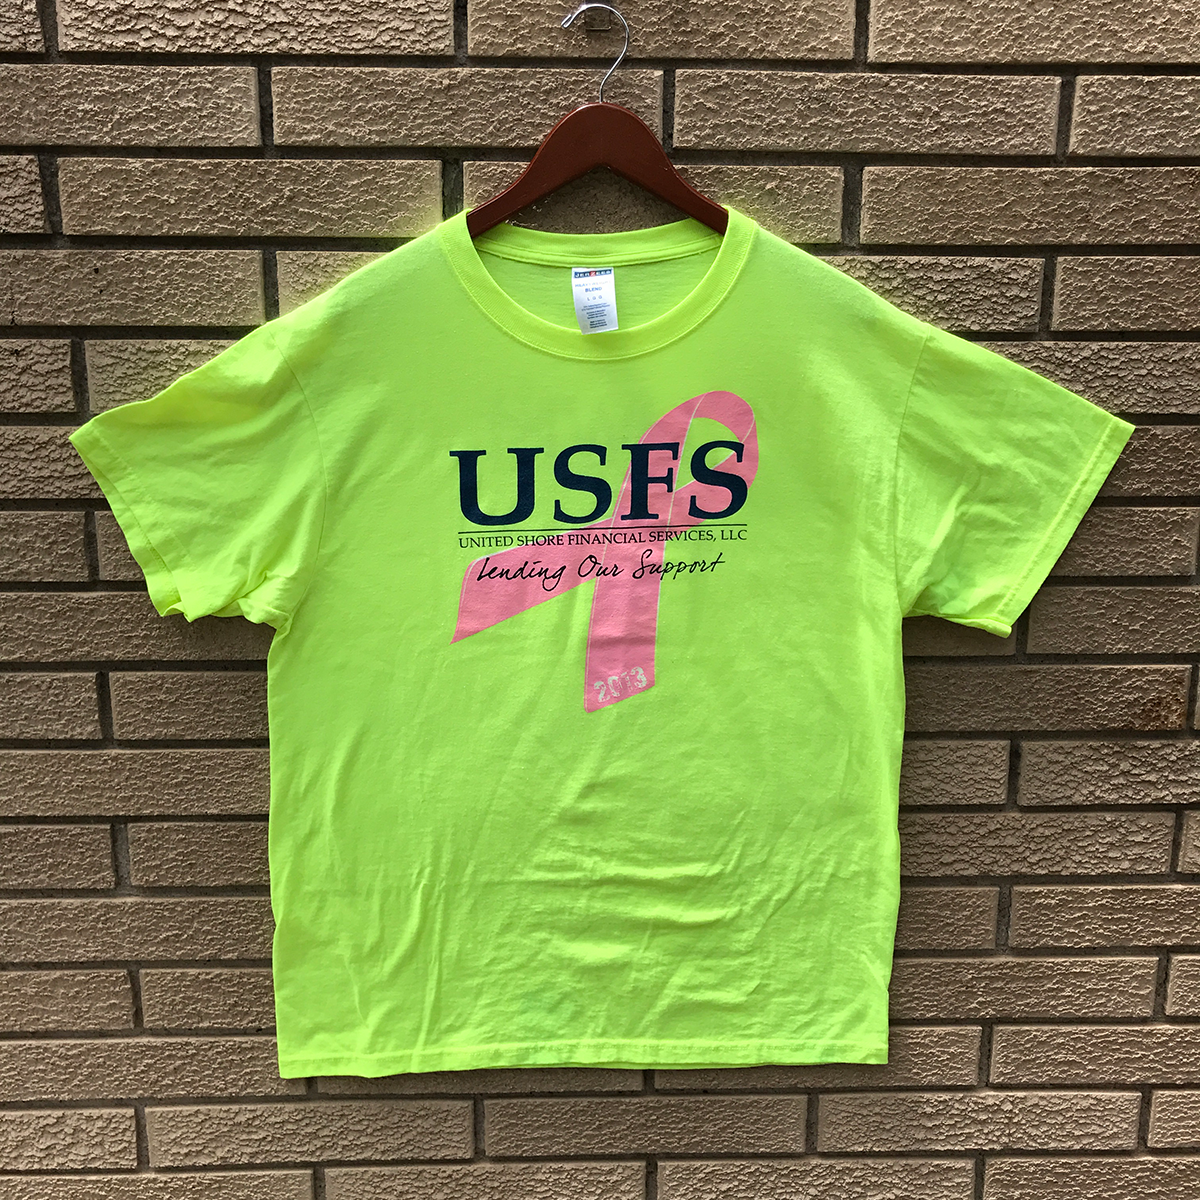 USFS Race for the Cure Team Shirt 2013